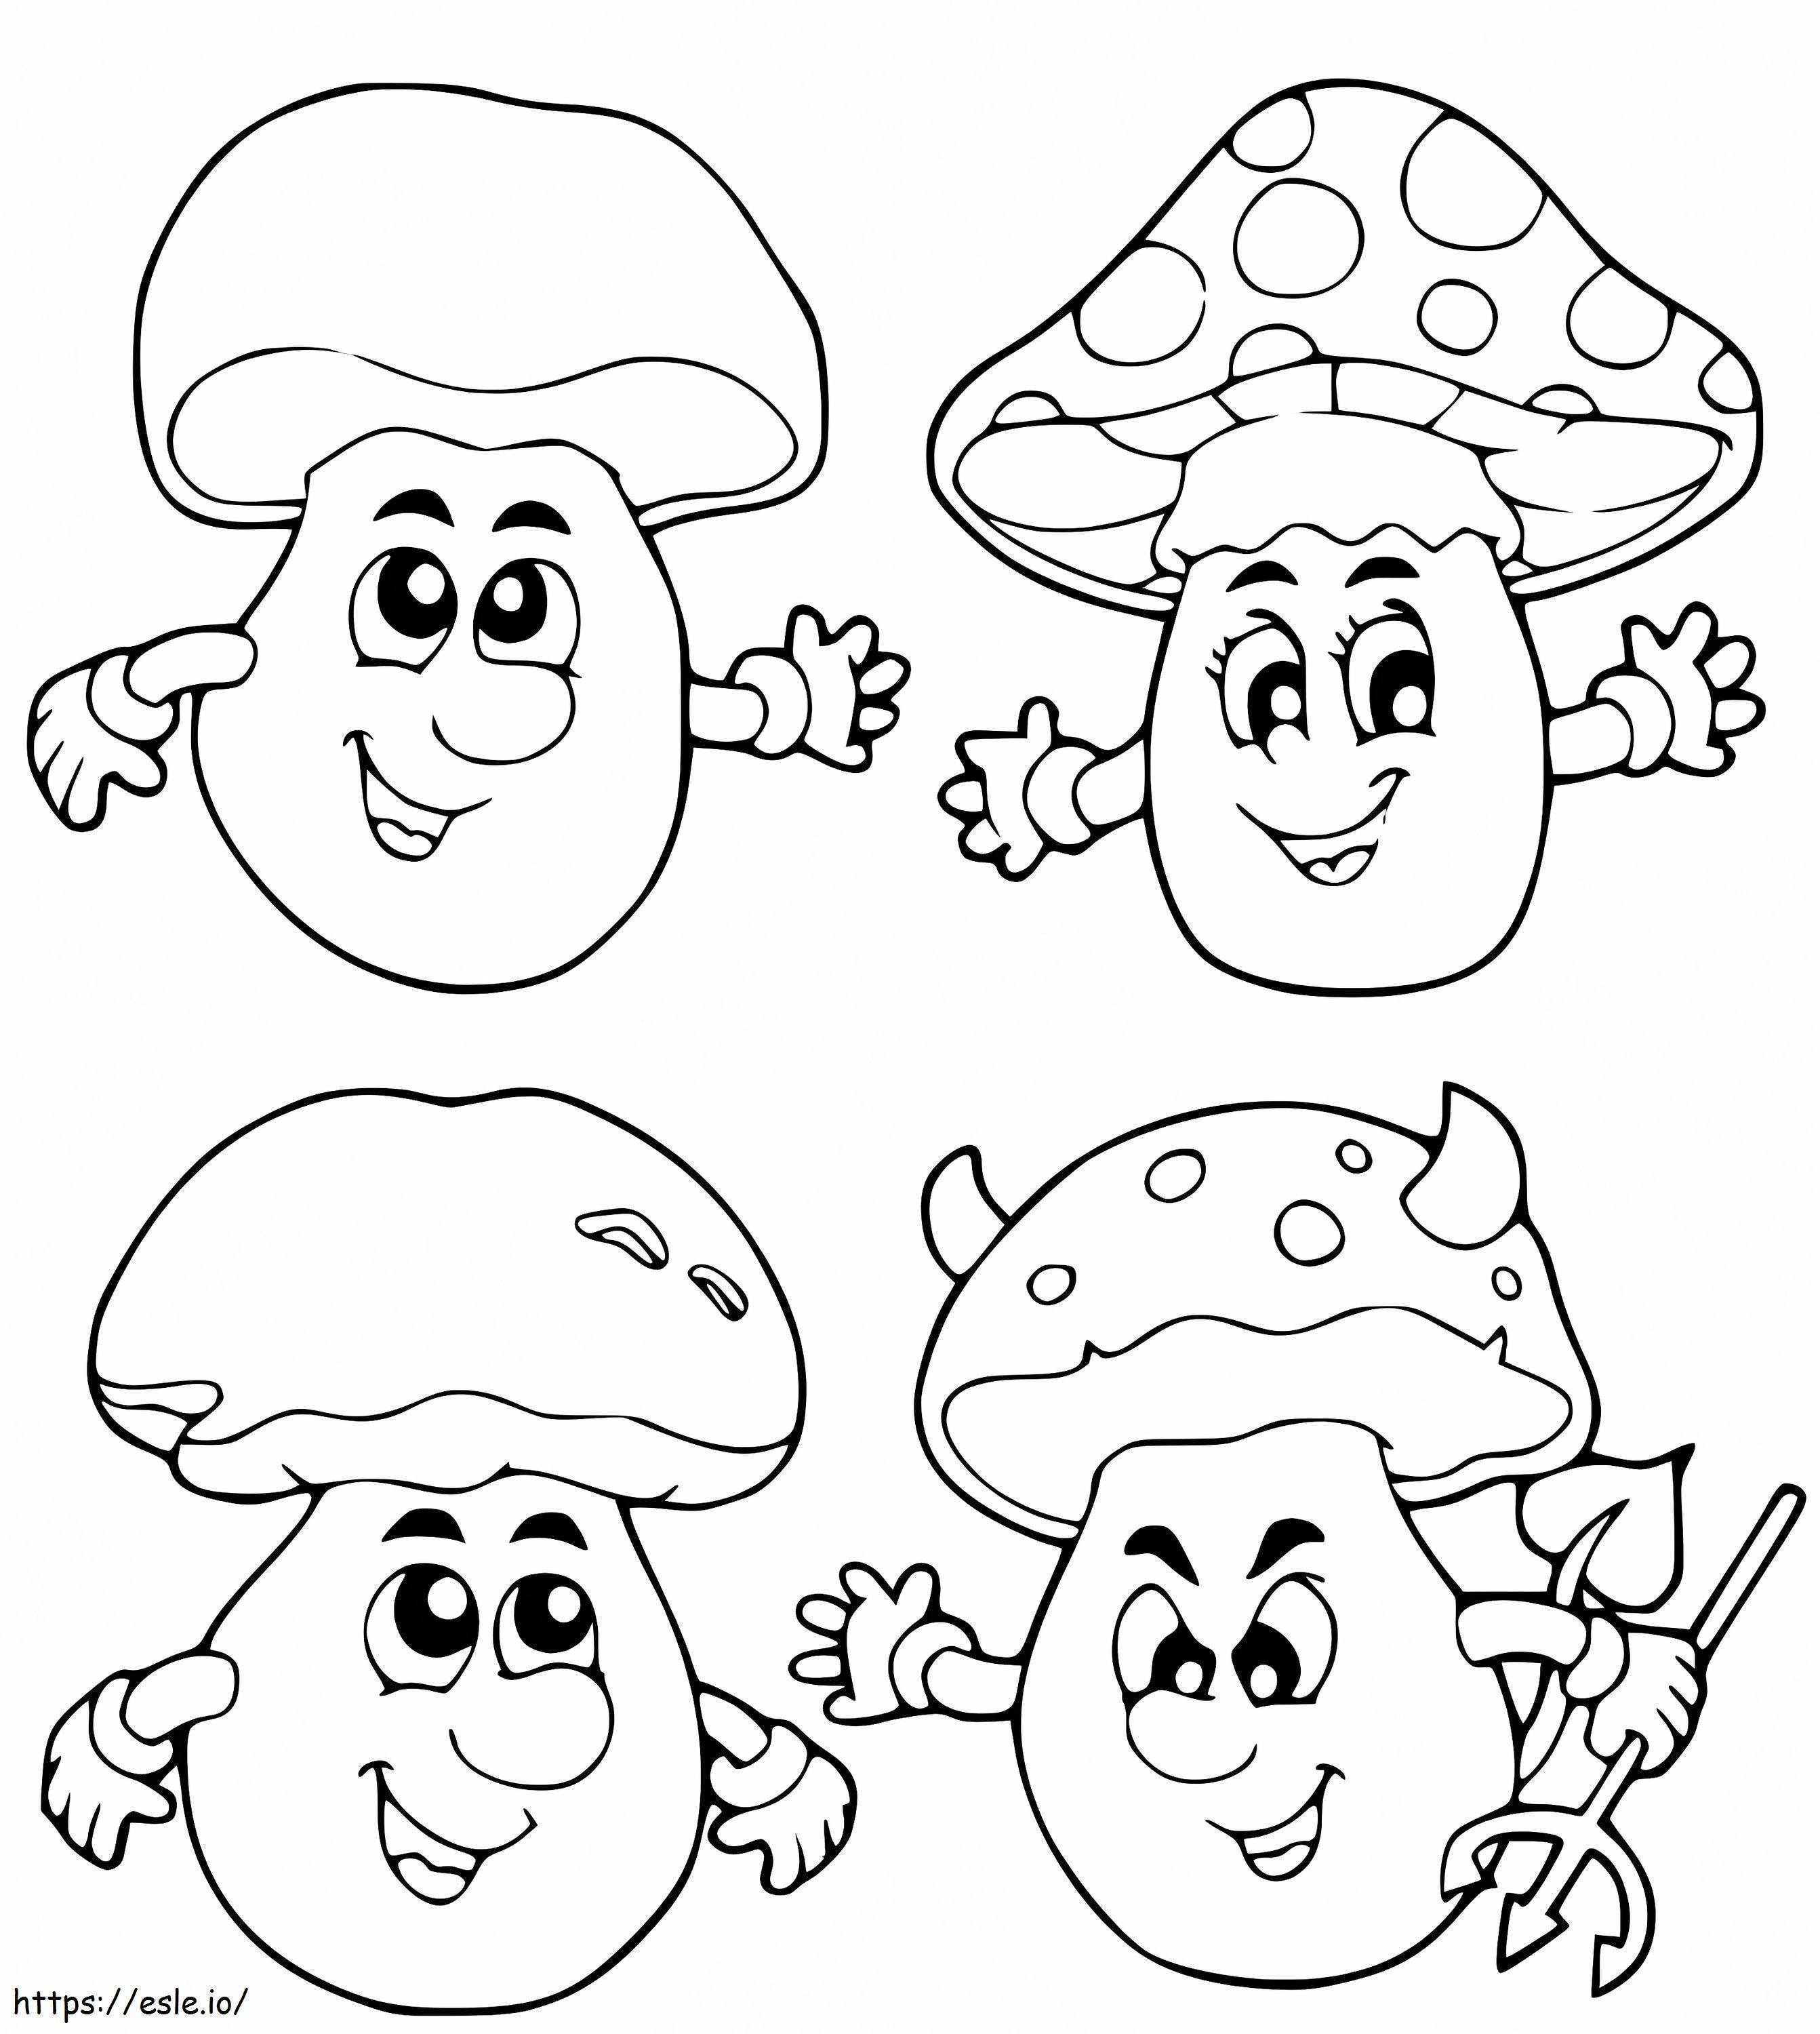 Autumn Mushrooms coloring page